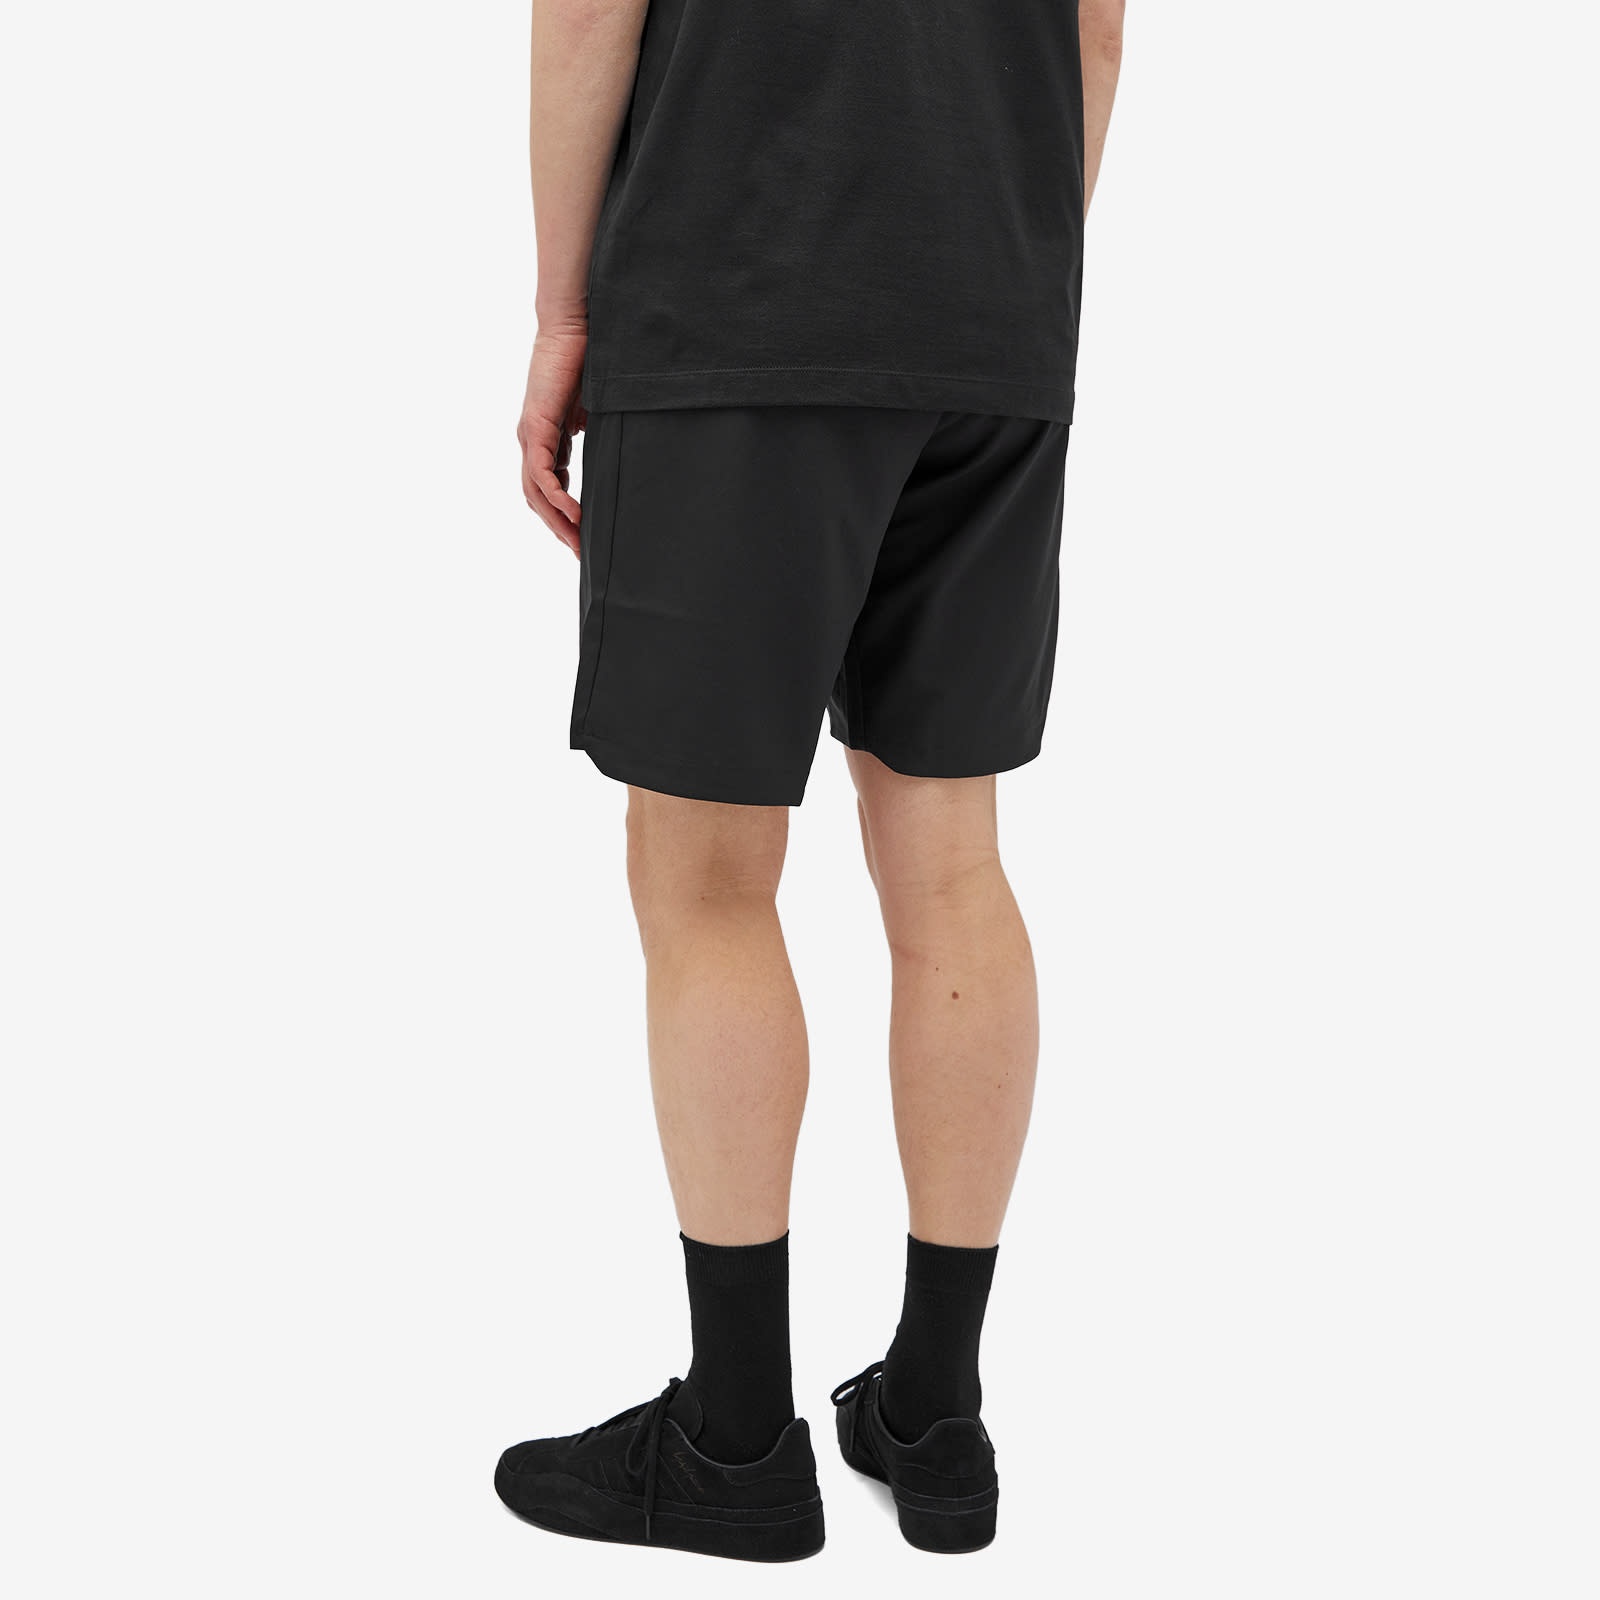 Y-3 x Real Madrid 4th Goalkeeper Jersey Shorts - 3